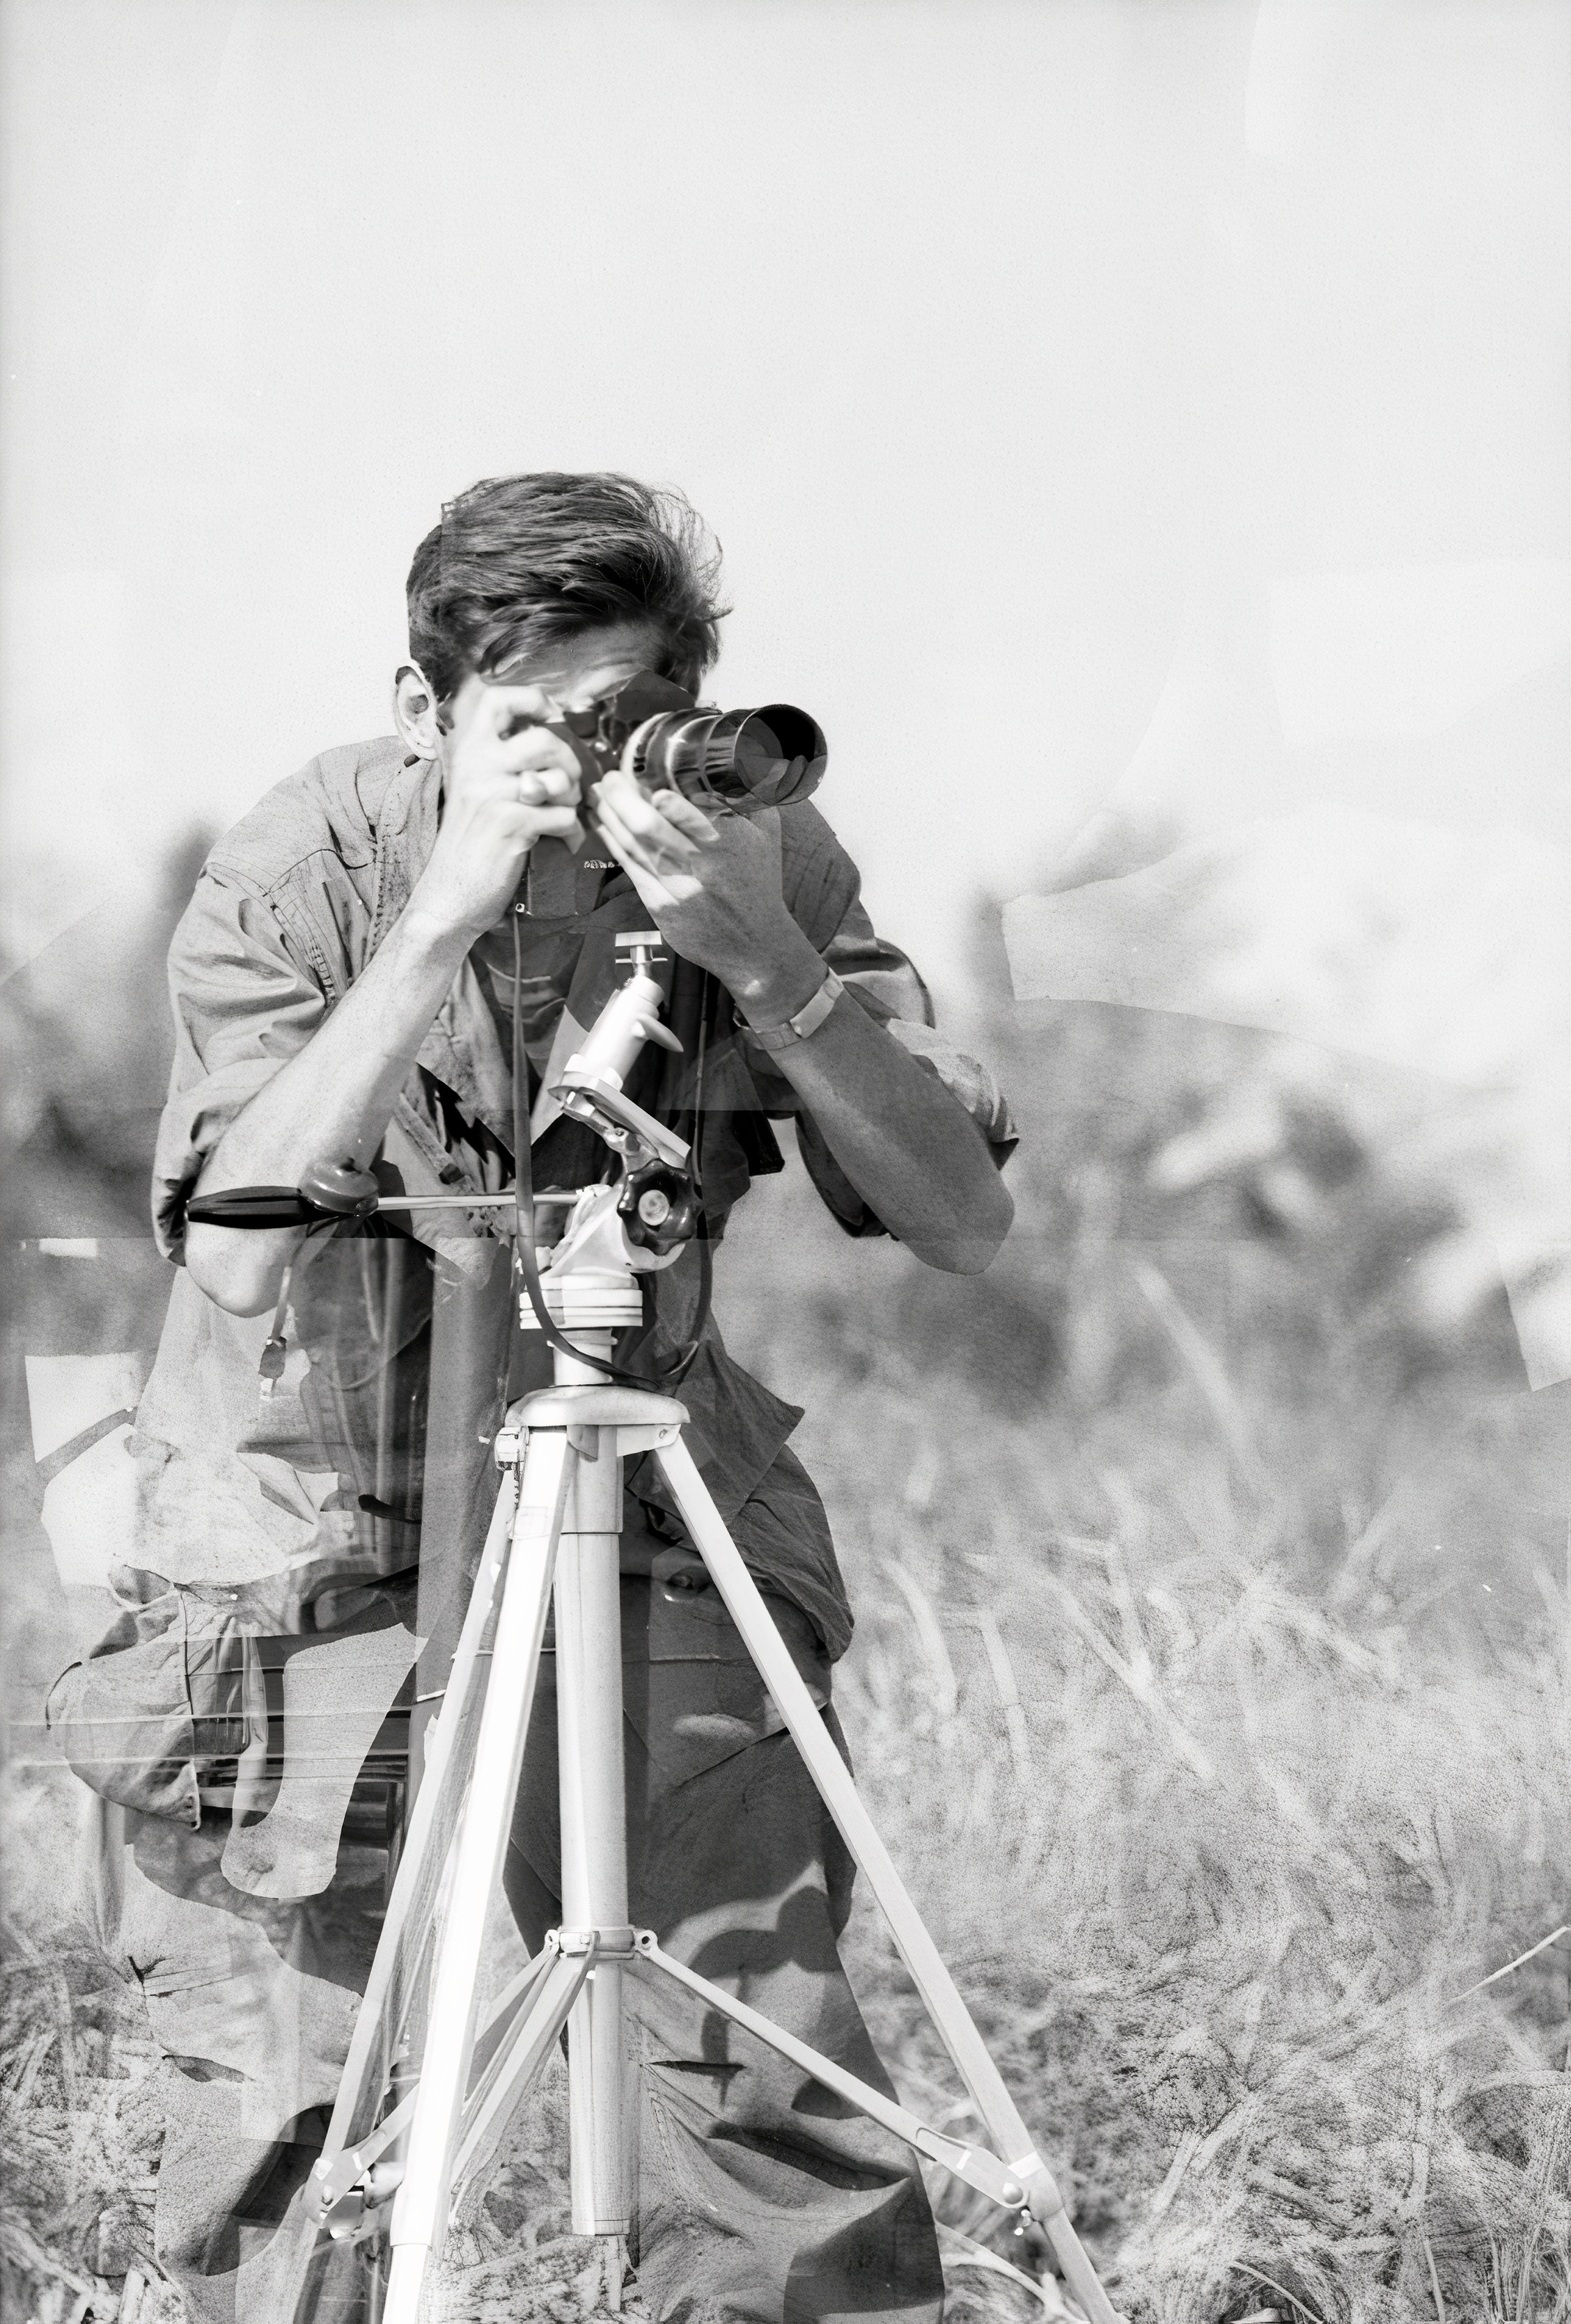 Robert J. Ellison is seen shooting in the field in Vietnam, where he covered the war as a civilian photographer for Newsweek and Times magazines. Photos courtesy of the Wisconsin Veterans Museum